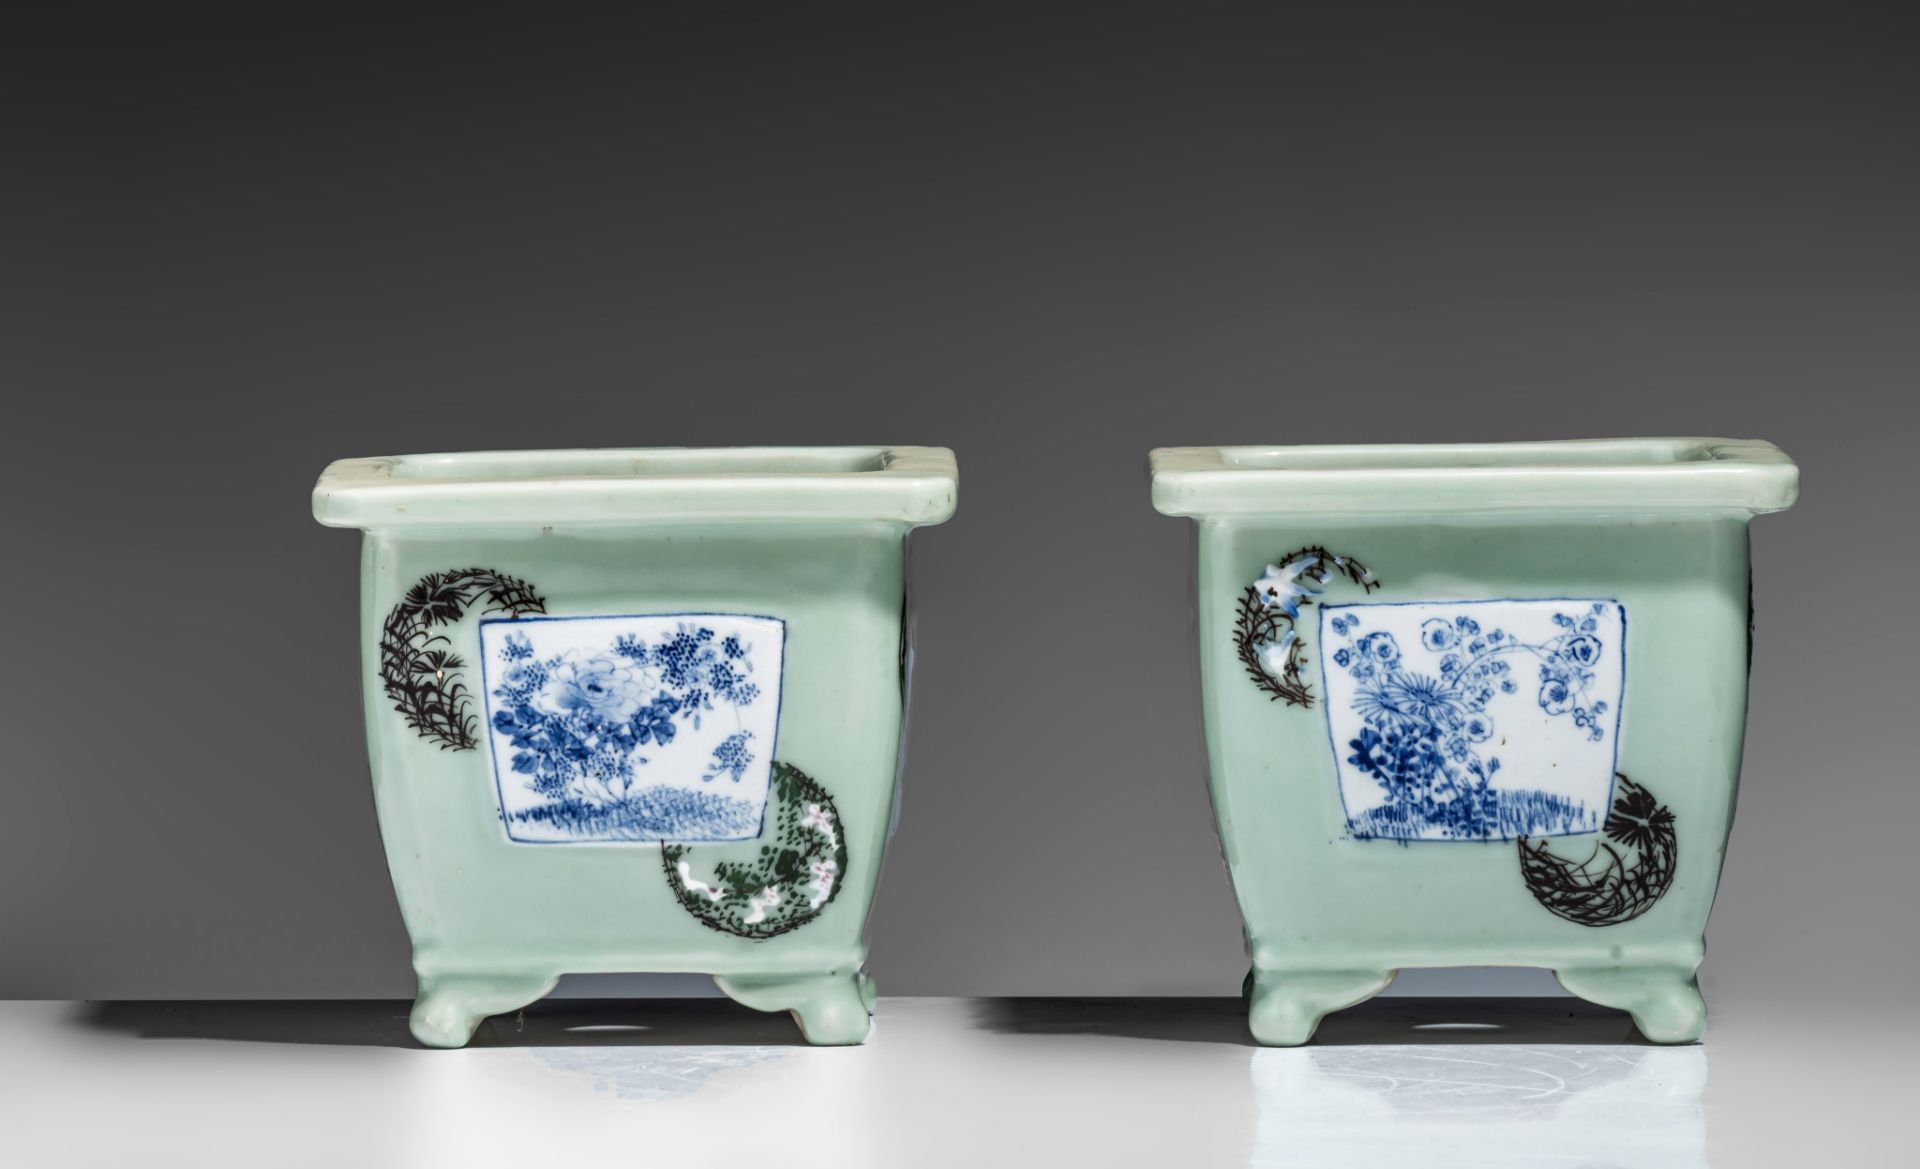 Two Japanese celadon ground planters, late Meiji/ early Taisho period, 17,5 x 17,5 cm - H 15,5 cm - Image 4 of 8